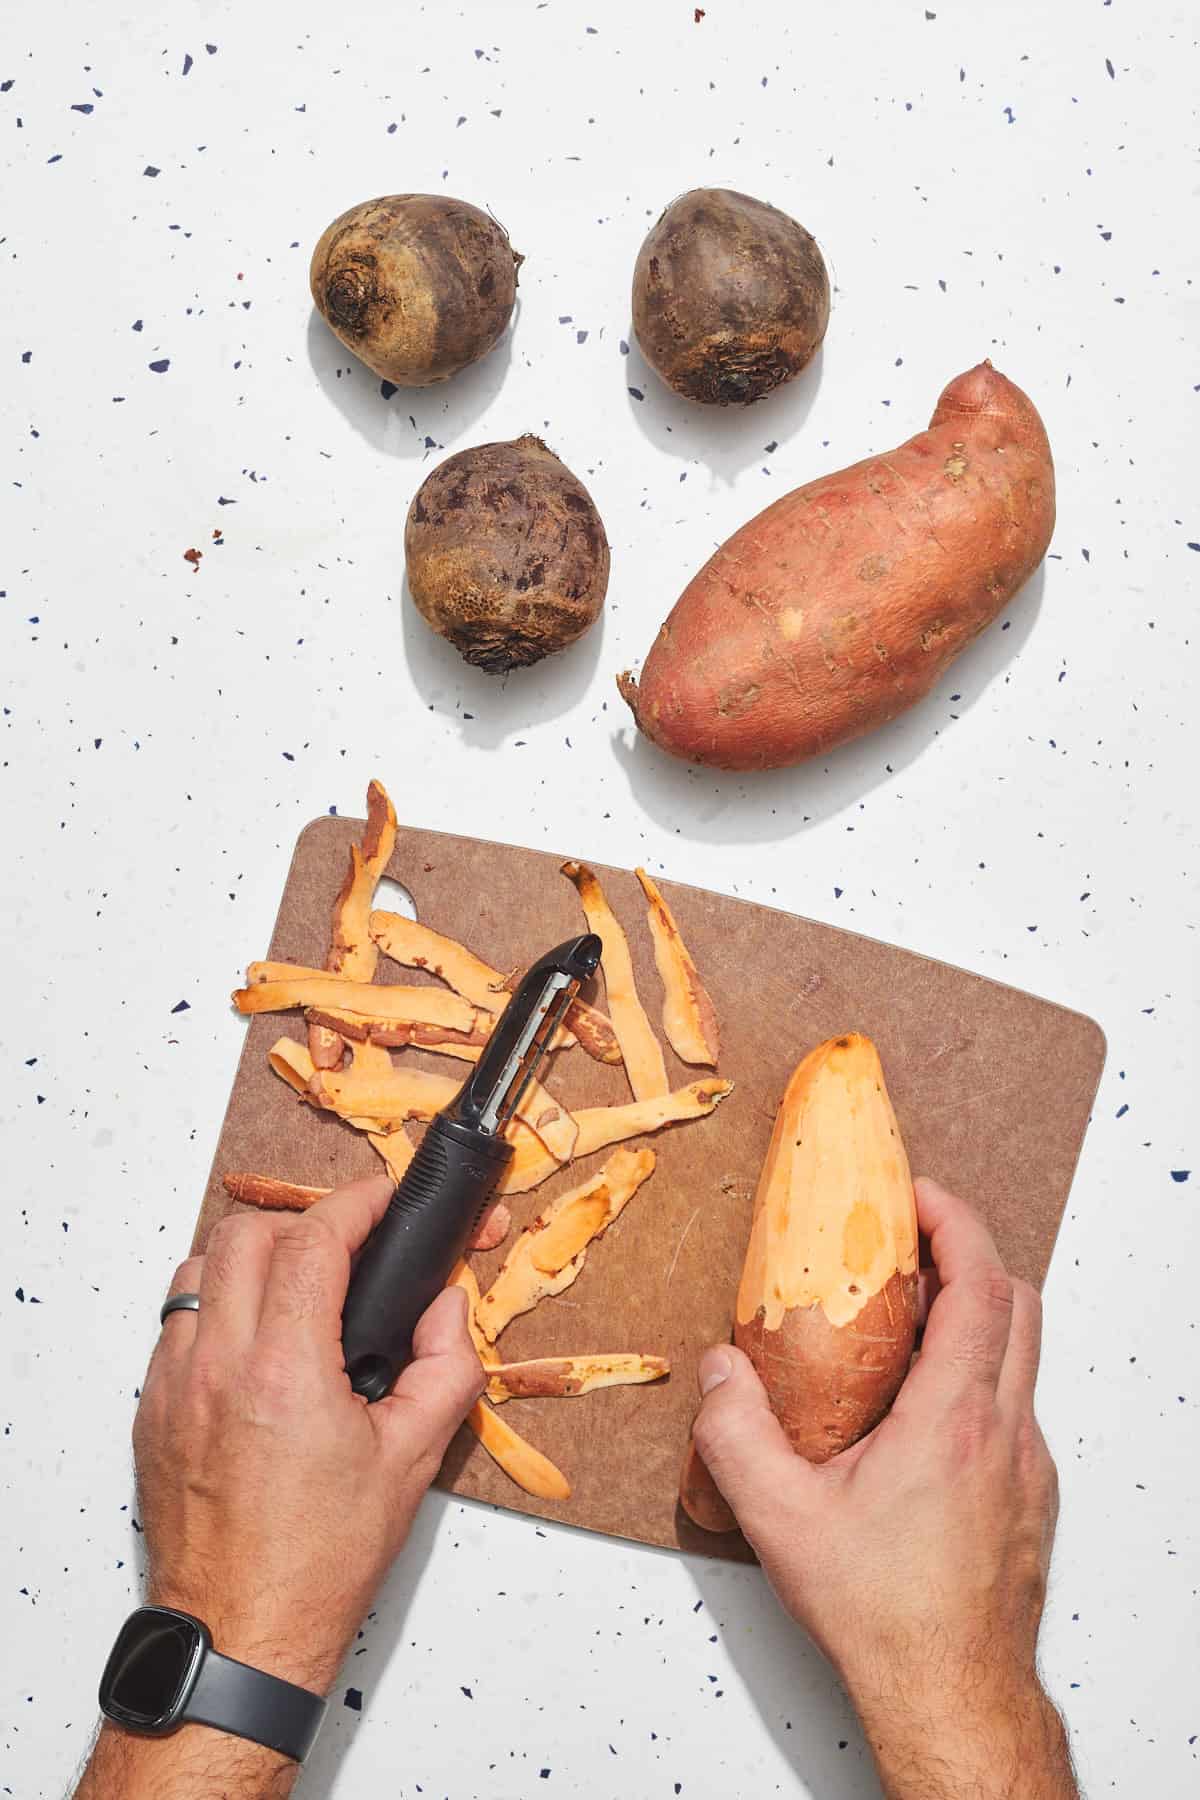 sweet potato and beet being peeled